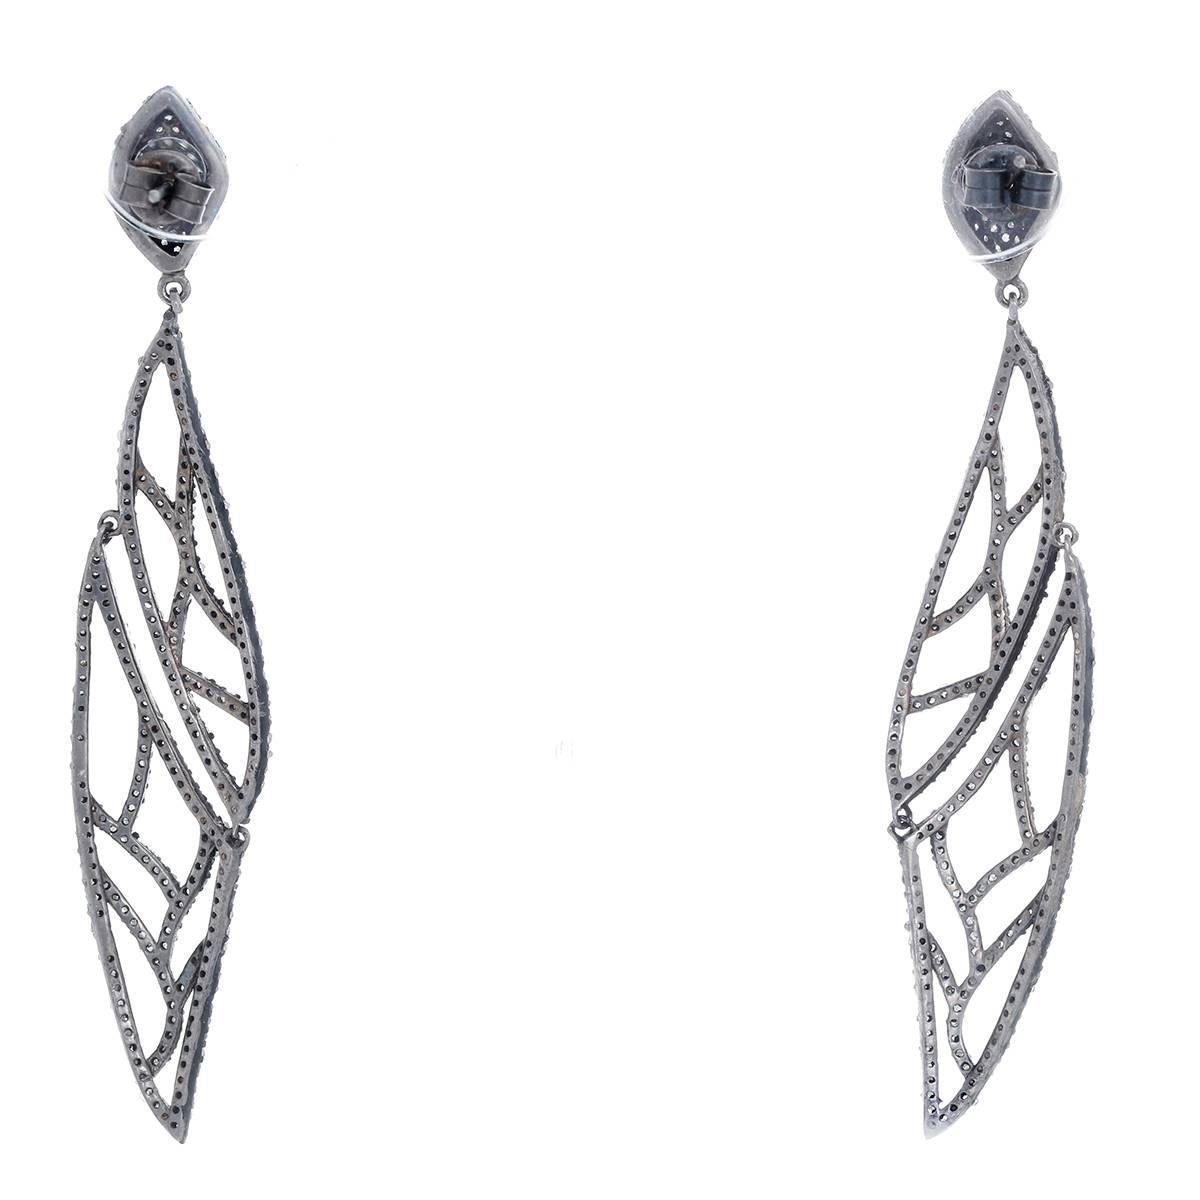 These amazing earrings feature 1.9 ctw. of diamond set in oxidized silver.  Earrings measure apx. 3-3/8 inches in length. Total weight is 11.9 grams.